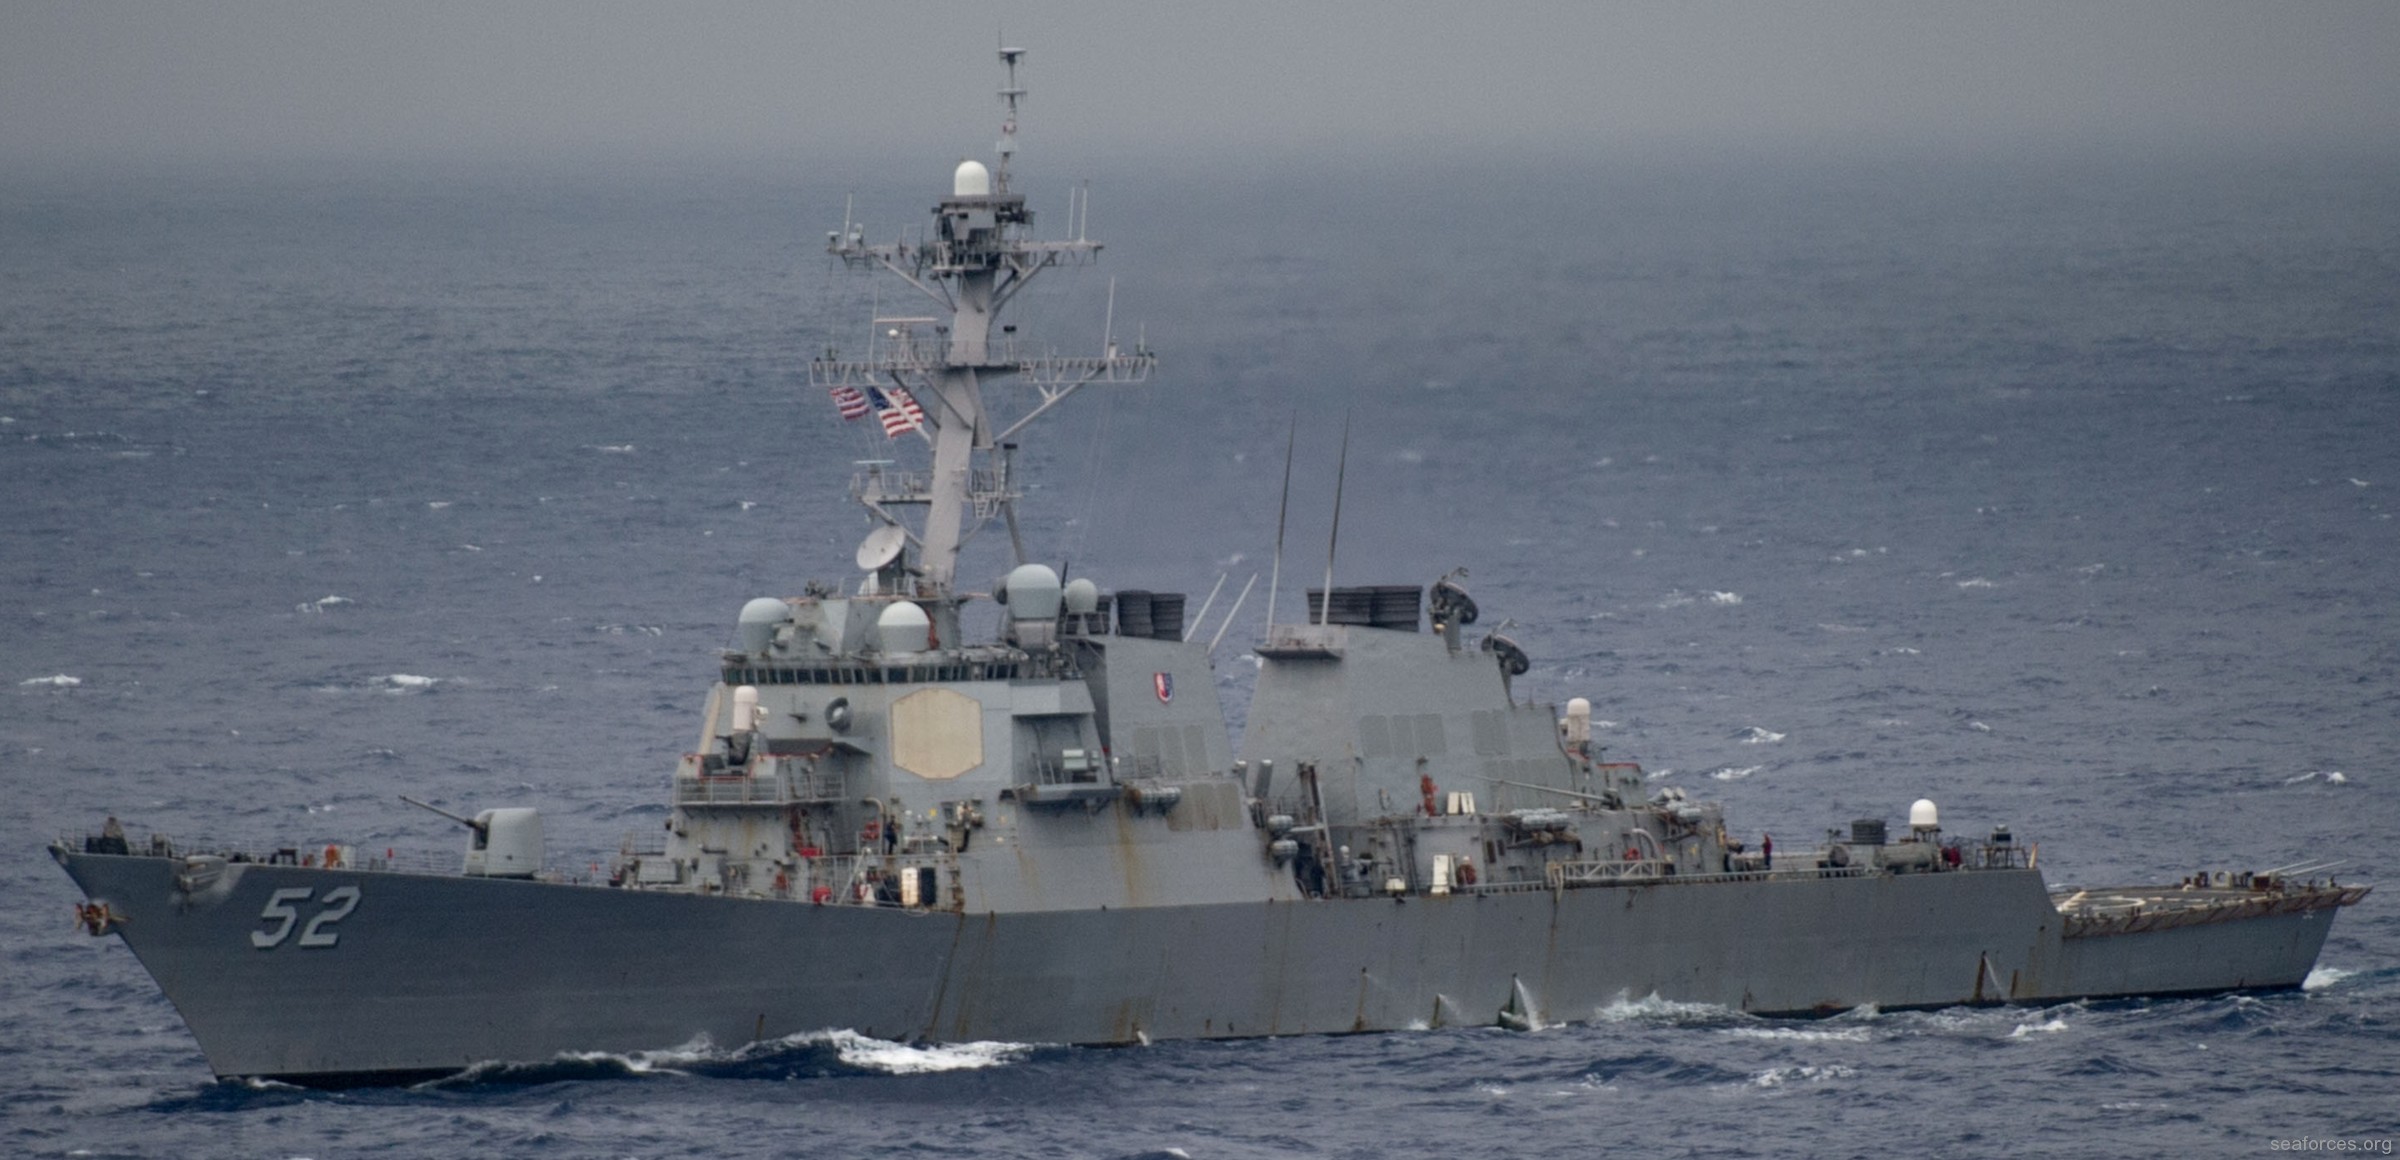 ddg-52 uss barry guided missile destroyer us navy 06 arleigh burke class